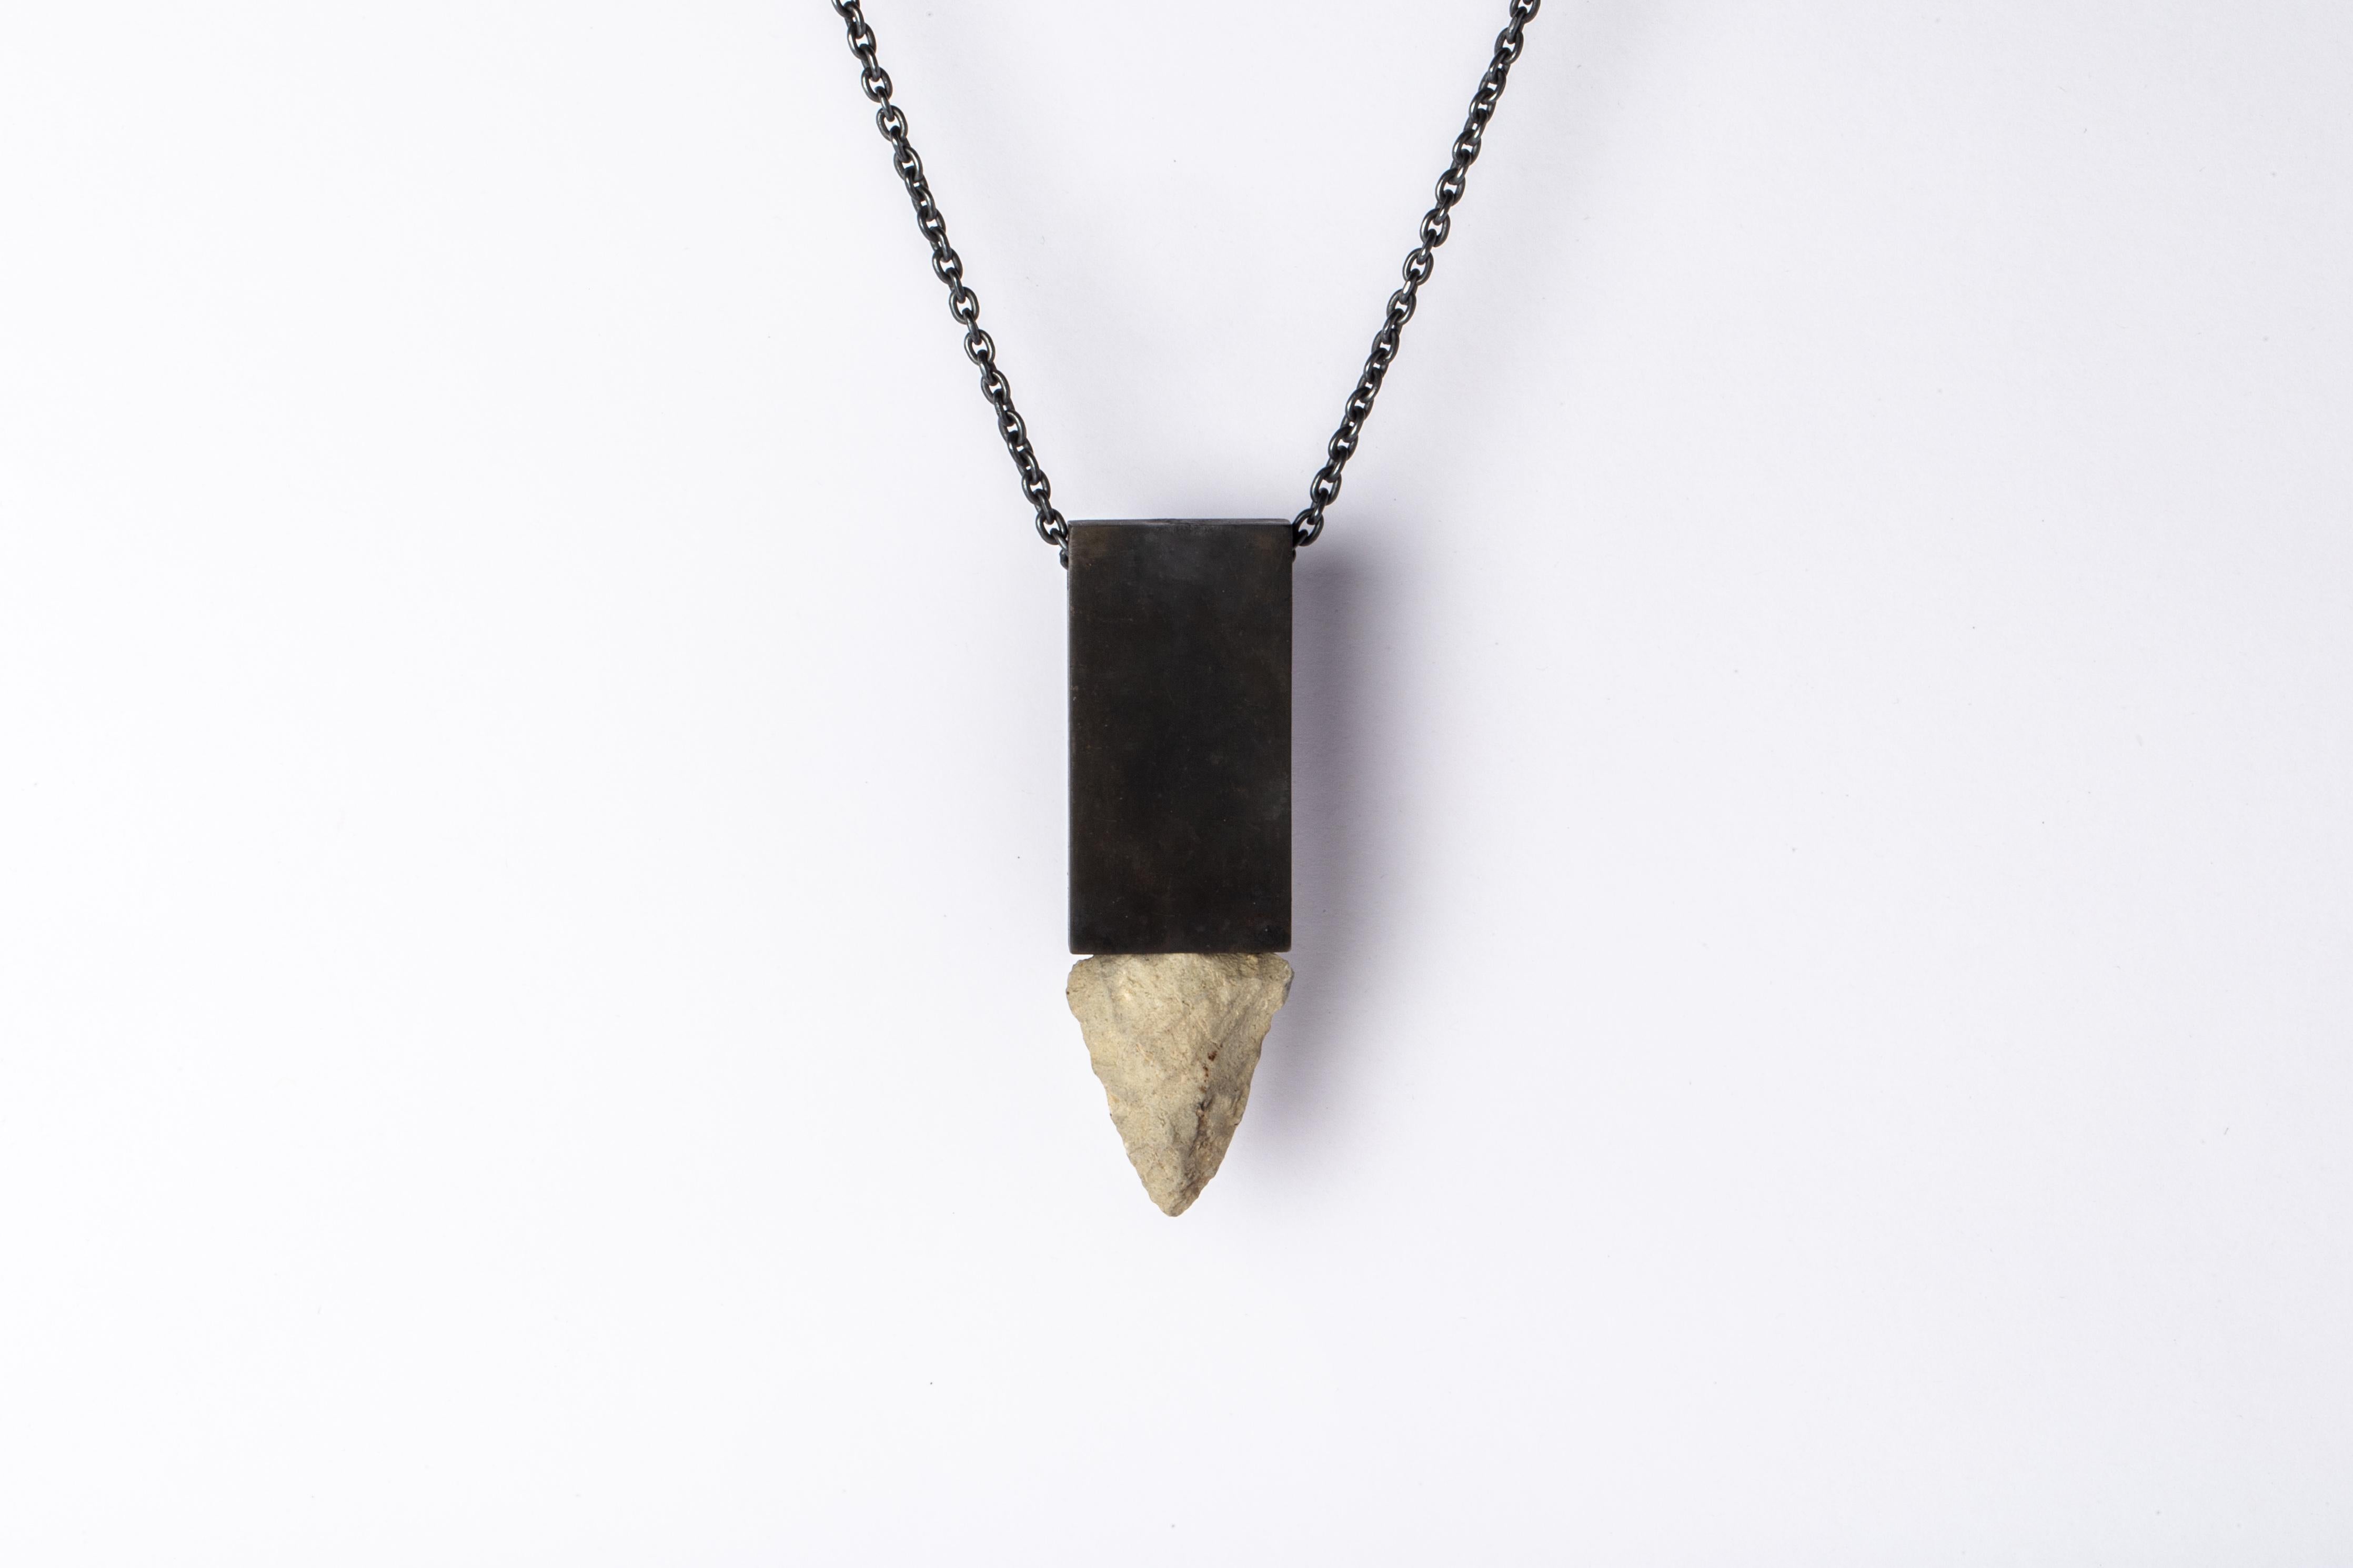 Pendant necklace in the shape of cuboid made in black bronze, oxidized sterling silver, and an arrowhead. The blackened white bronze will fade over time. Please note: This is an irregular, uneven finish and will differ from the photograph. For a